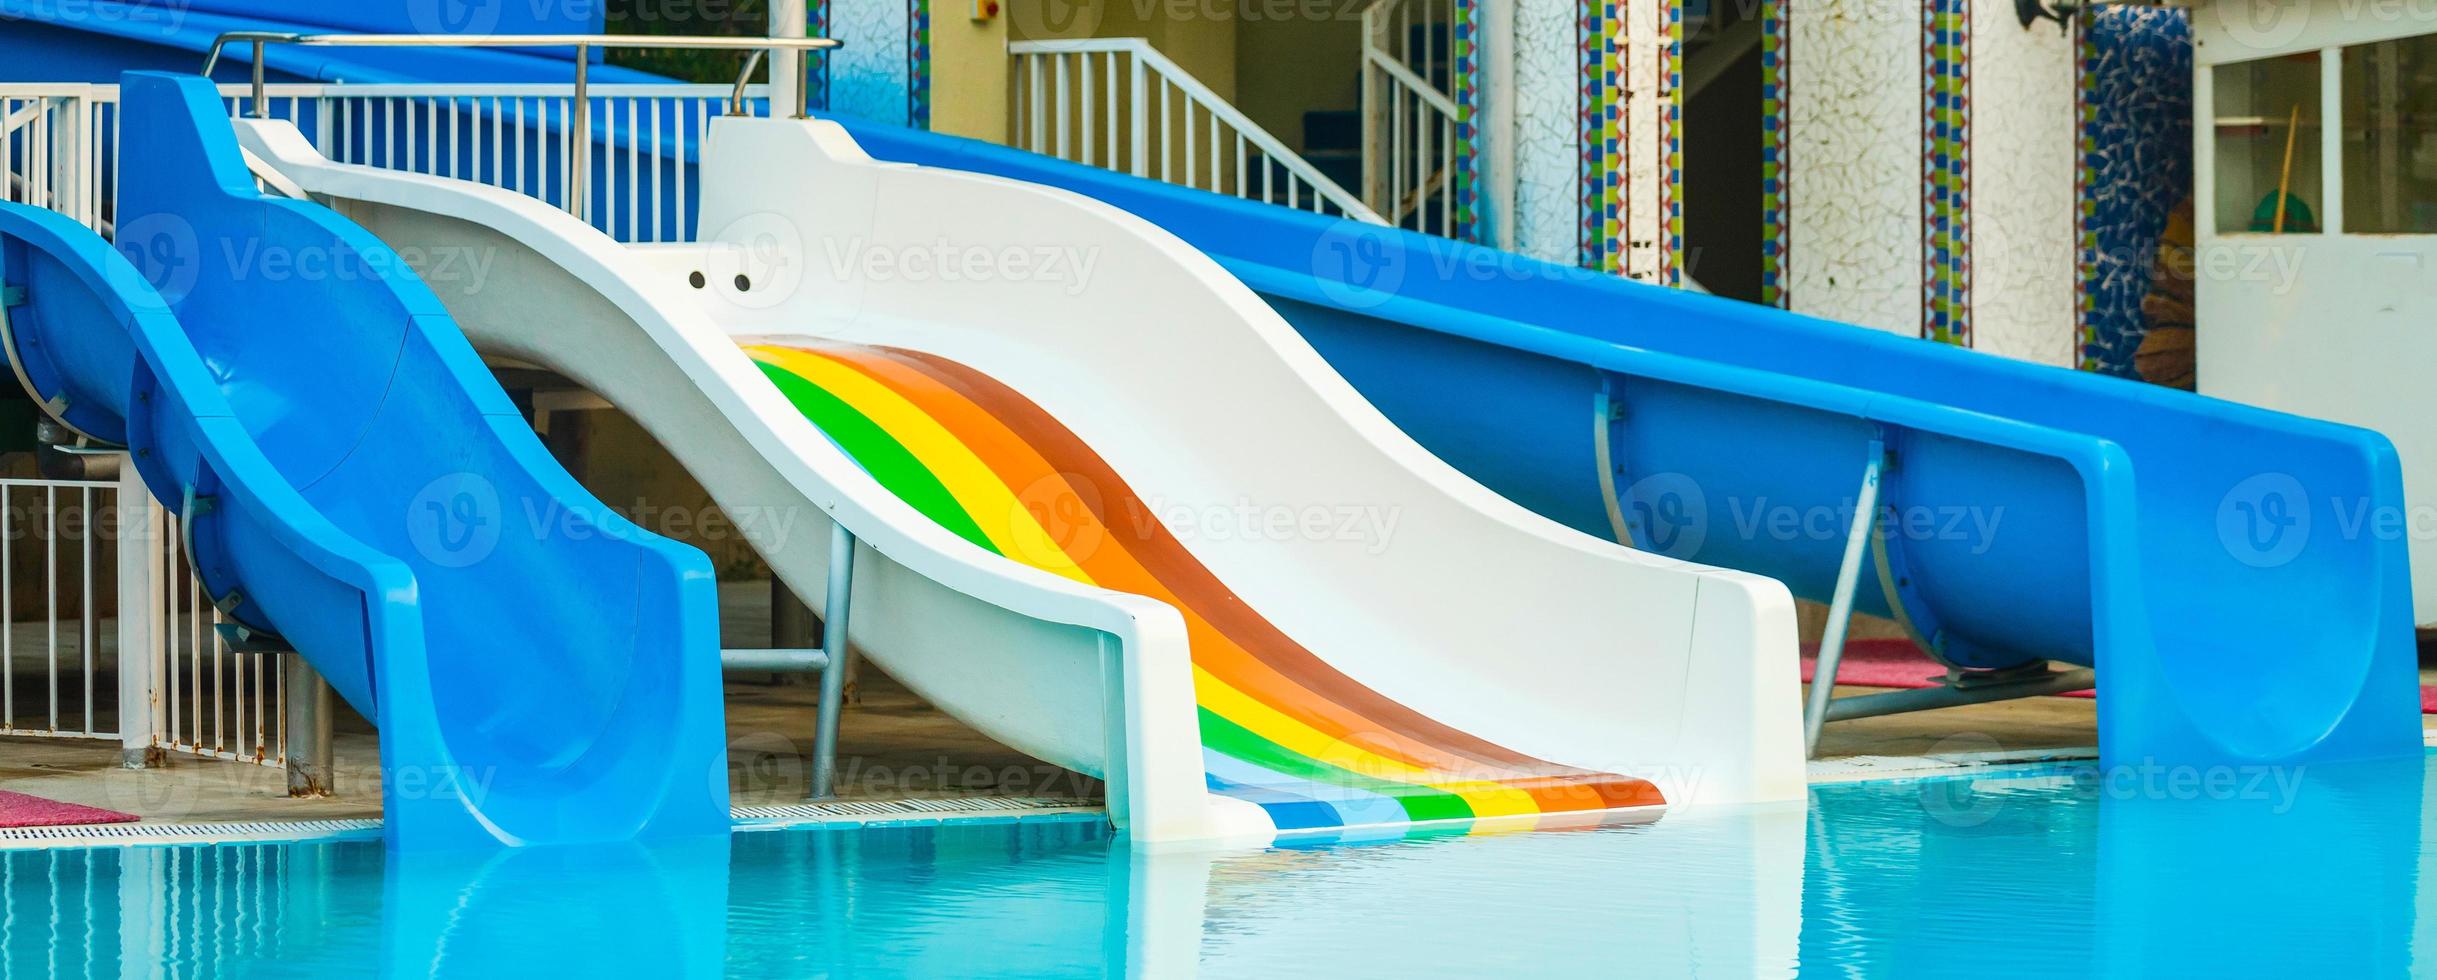 water slides at the water park photo